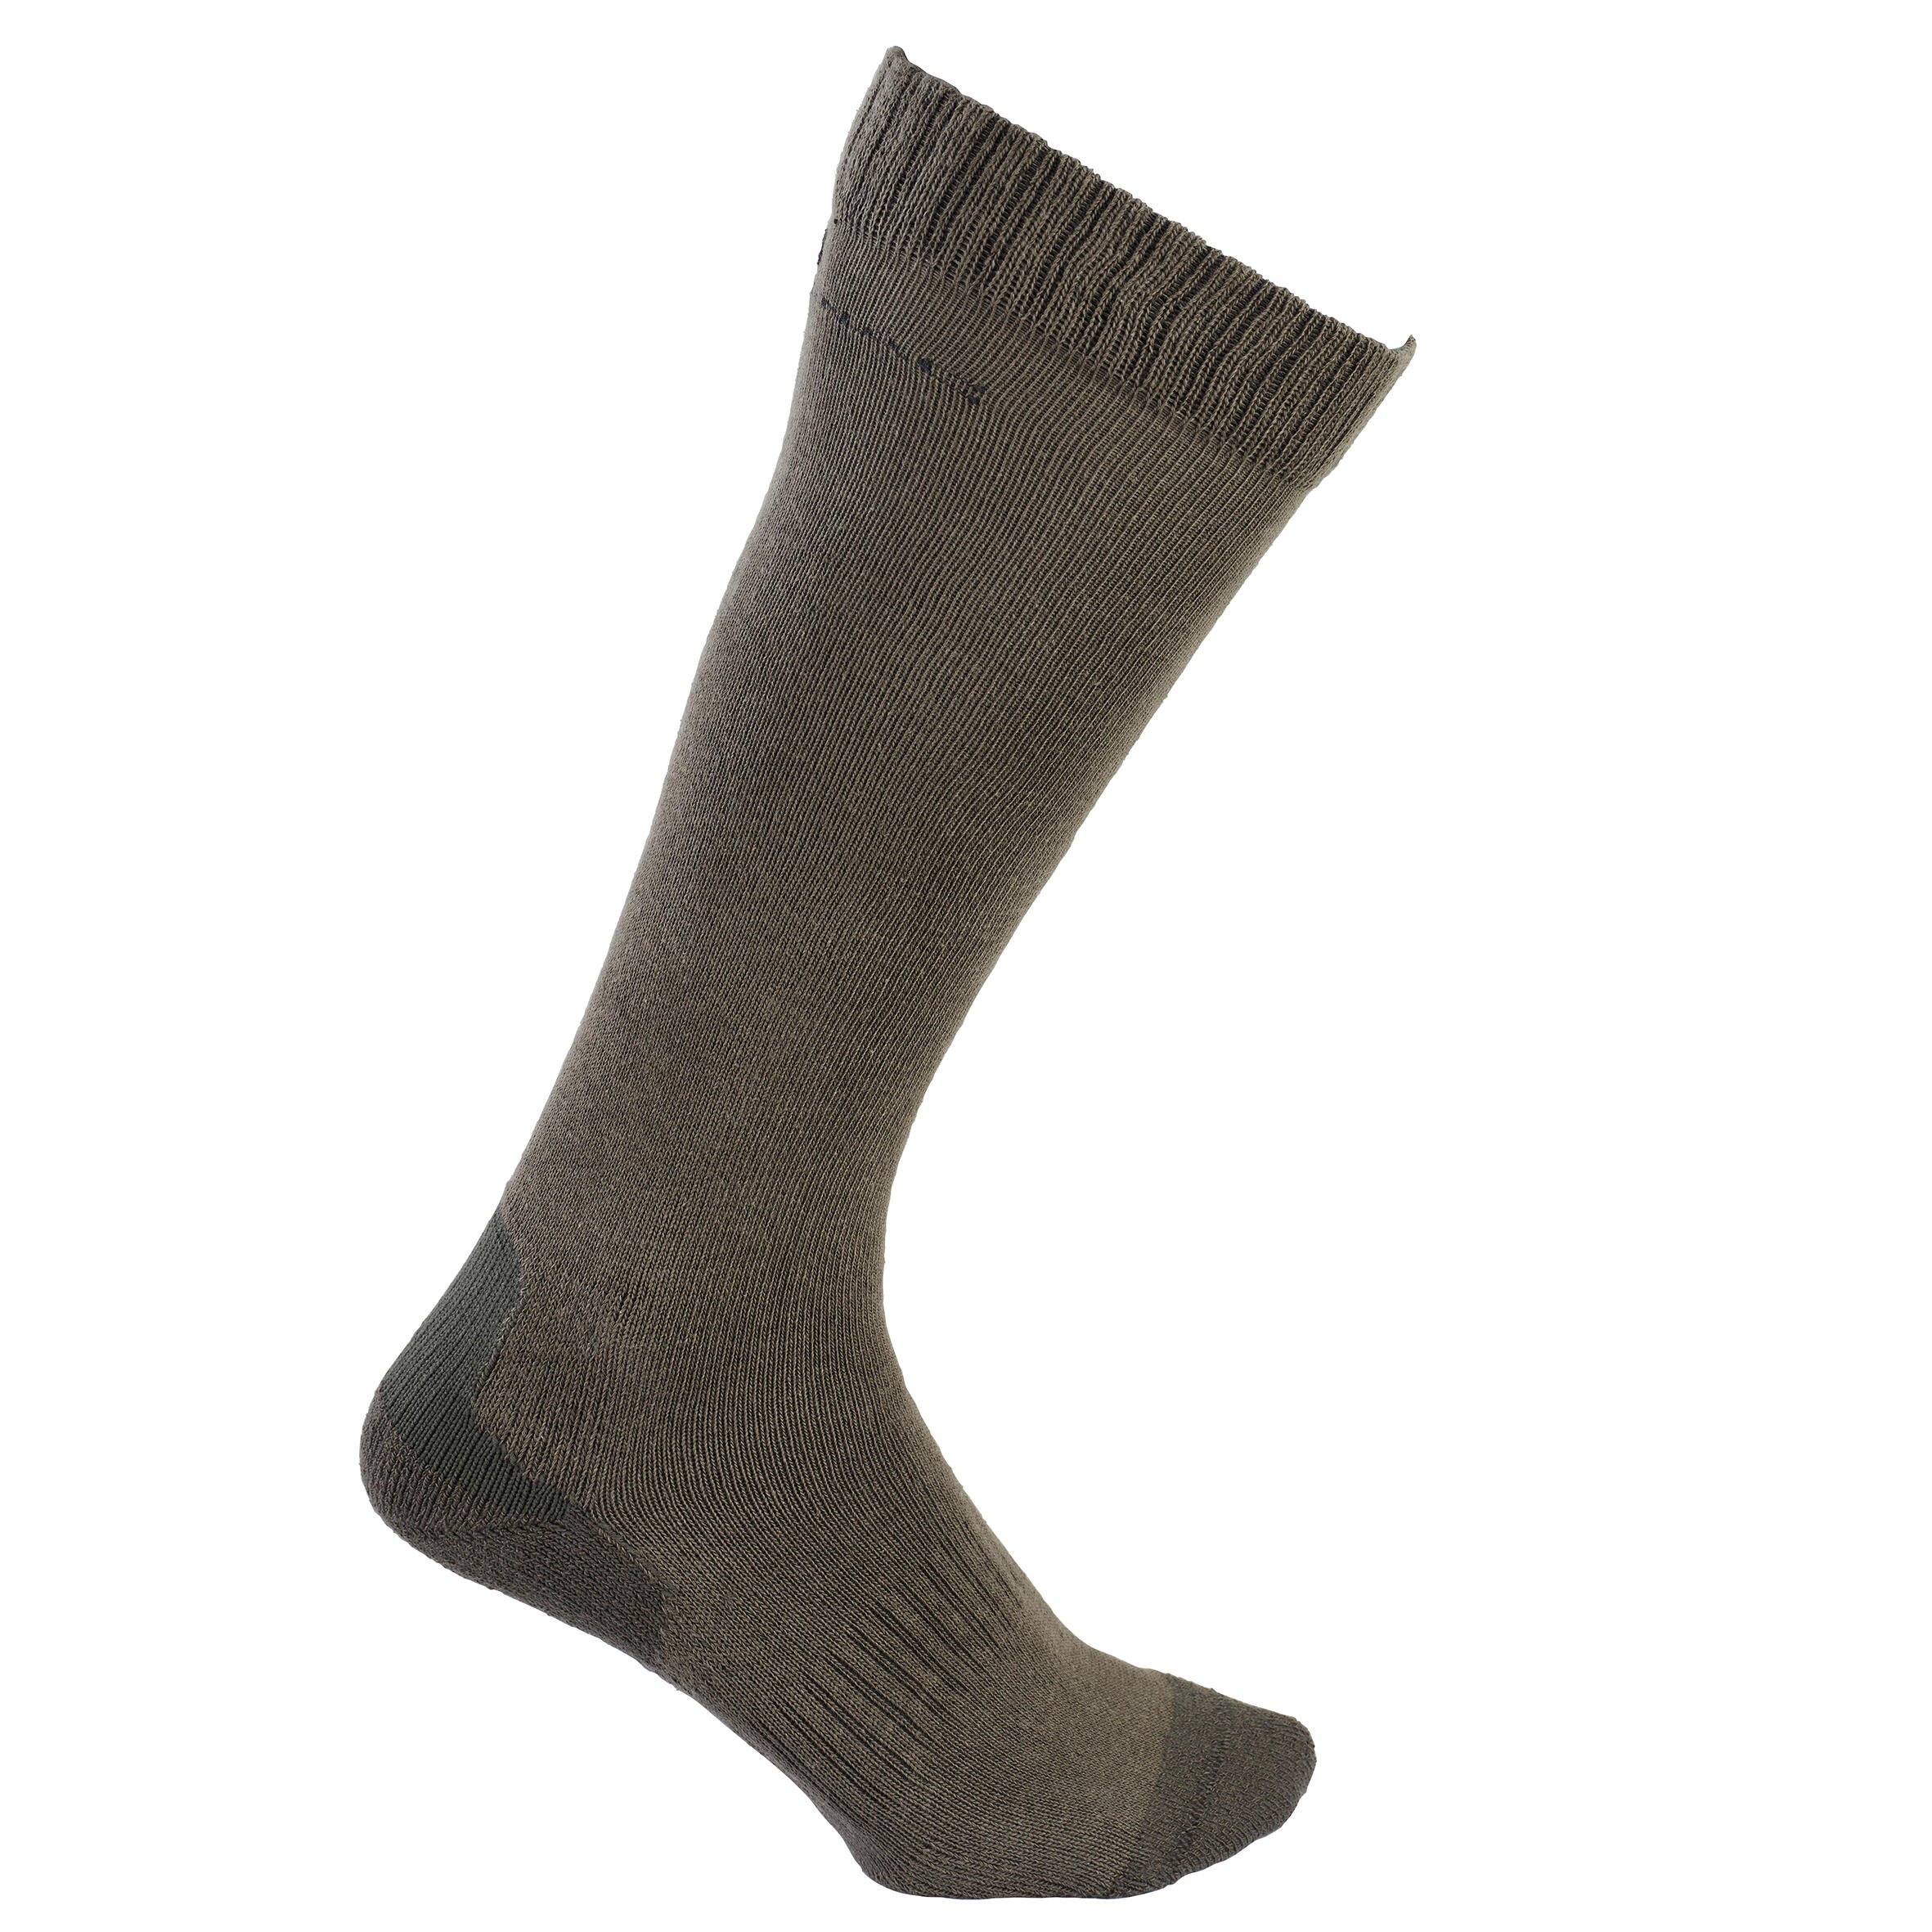 PACK OF 2 PAIRS OF BREATHABLE TALL HUNTING SOCKS 100 8/10